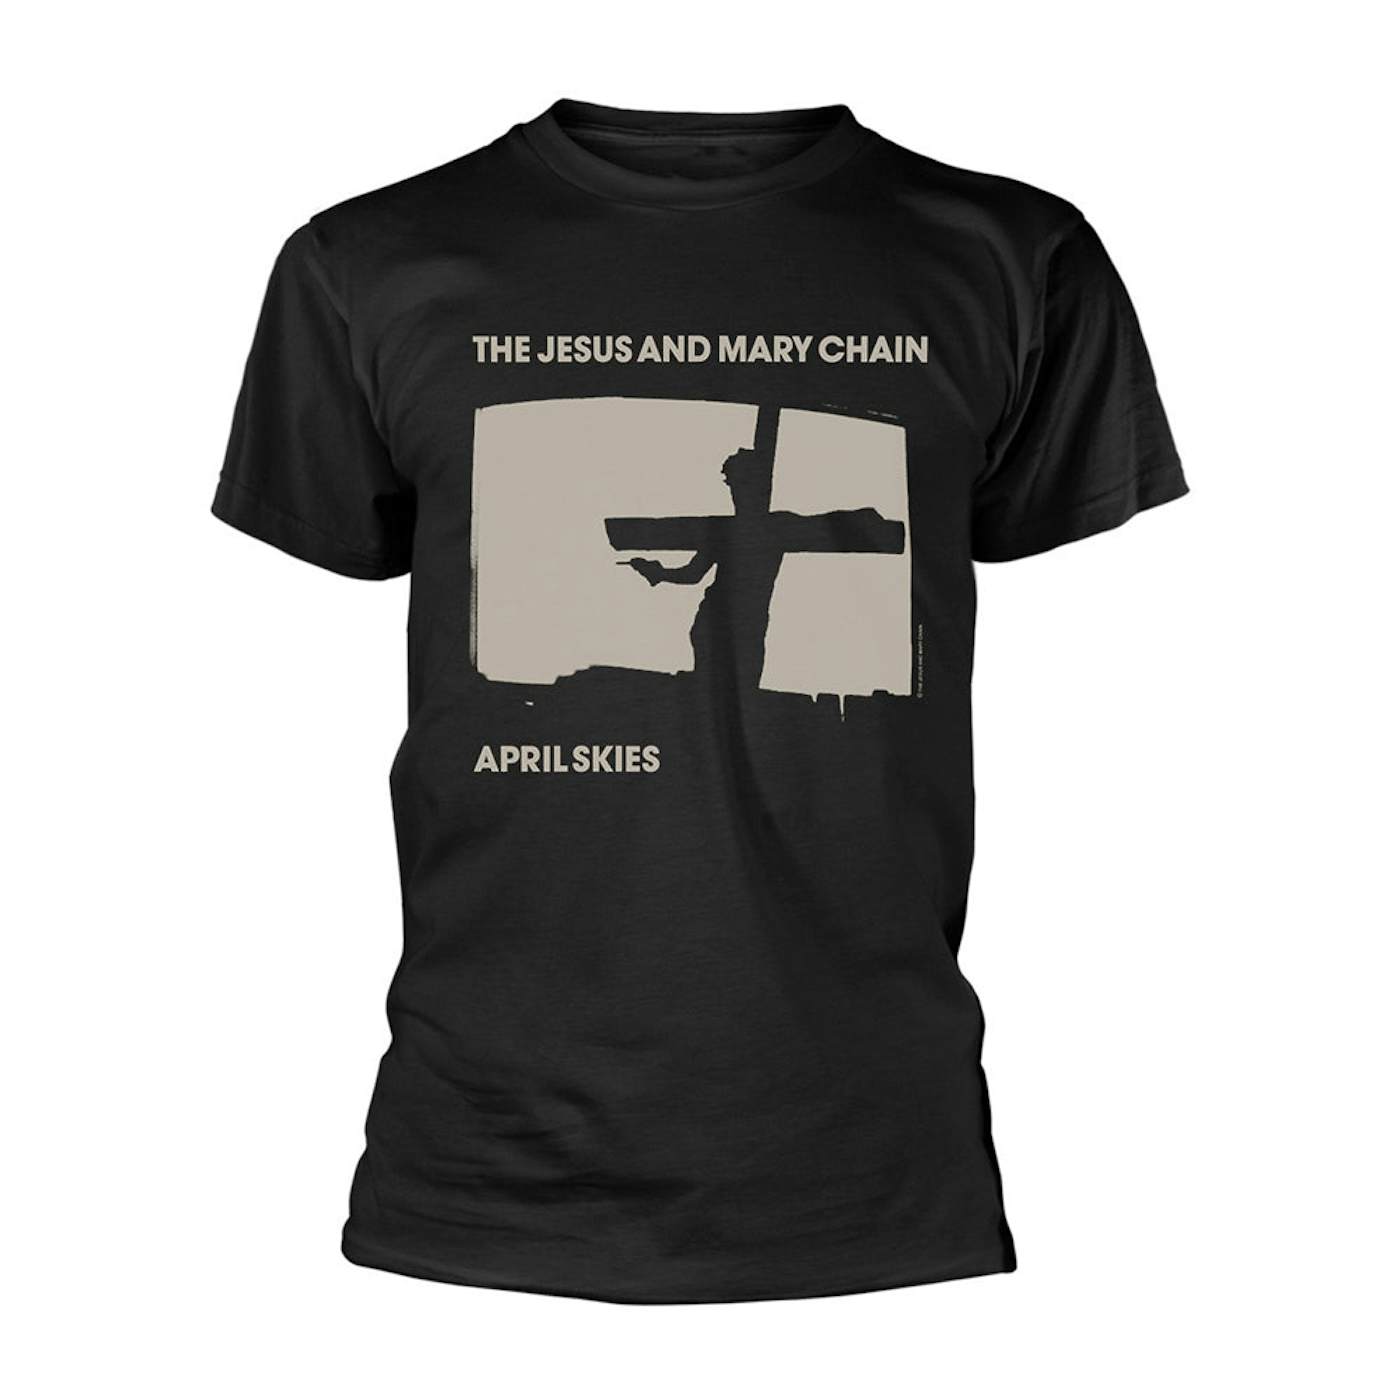 The Jesus And Mary Chain T Shirt - April Skies